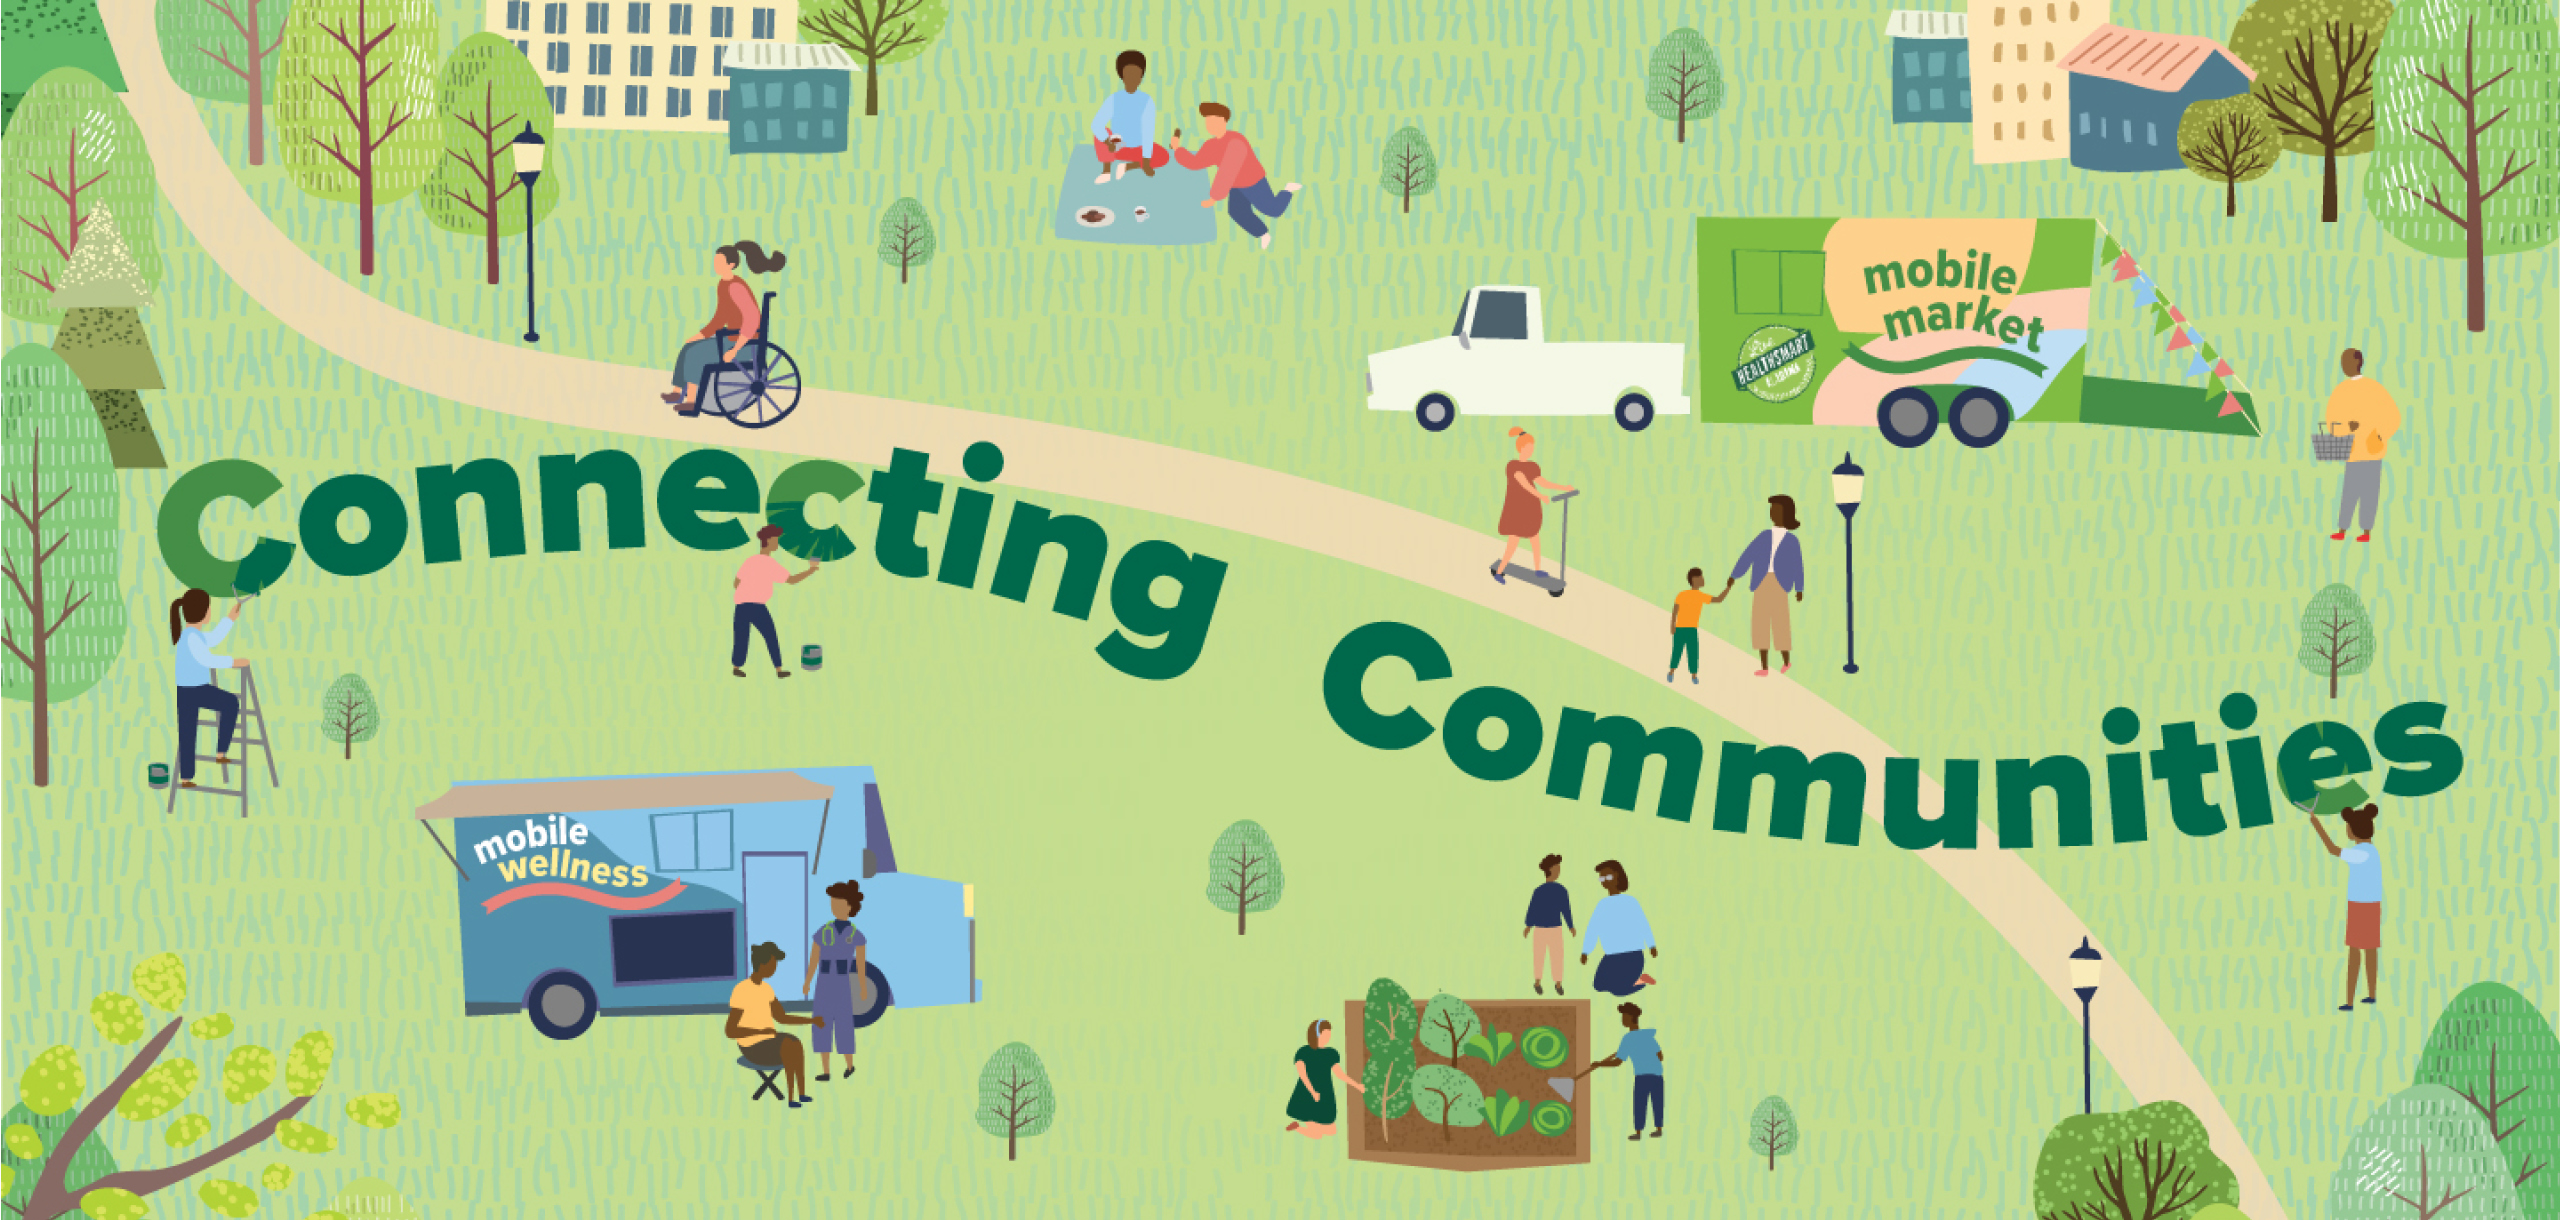 Connecting Communities Illustration of a greenspace and community.